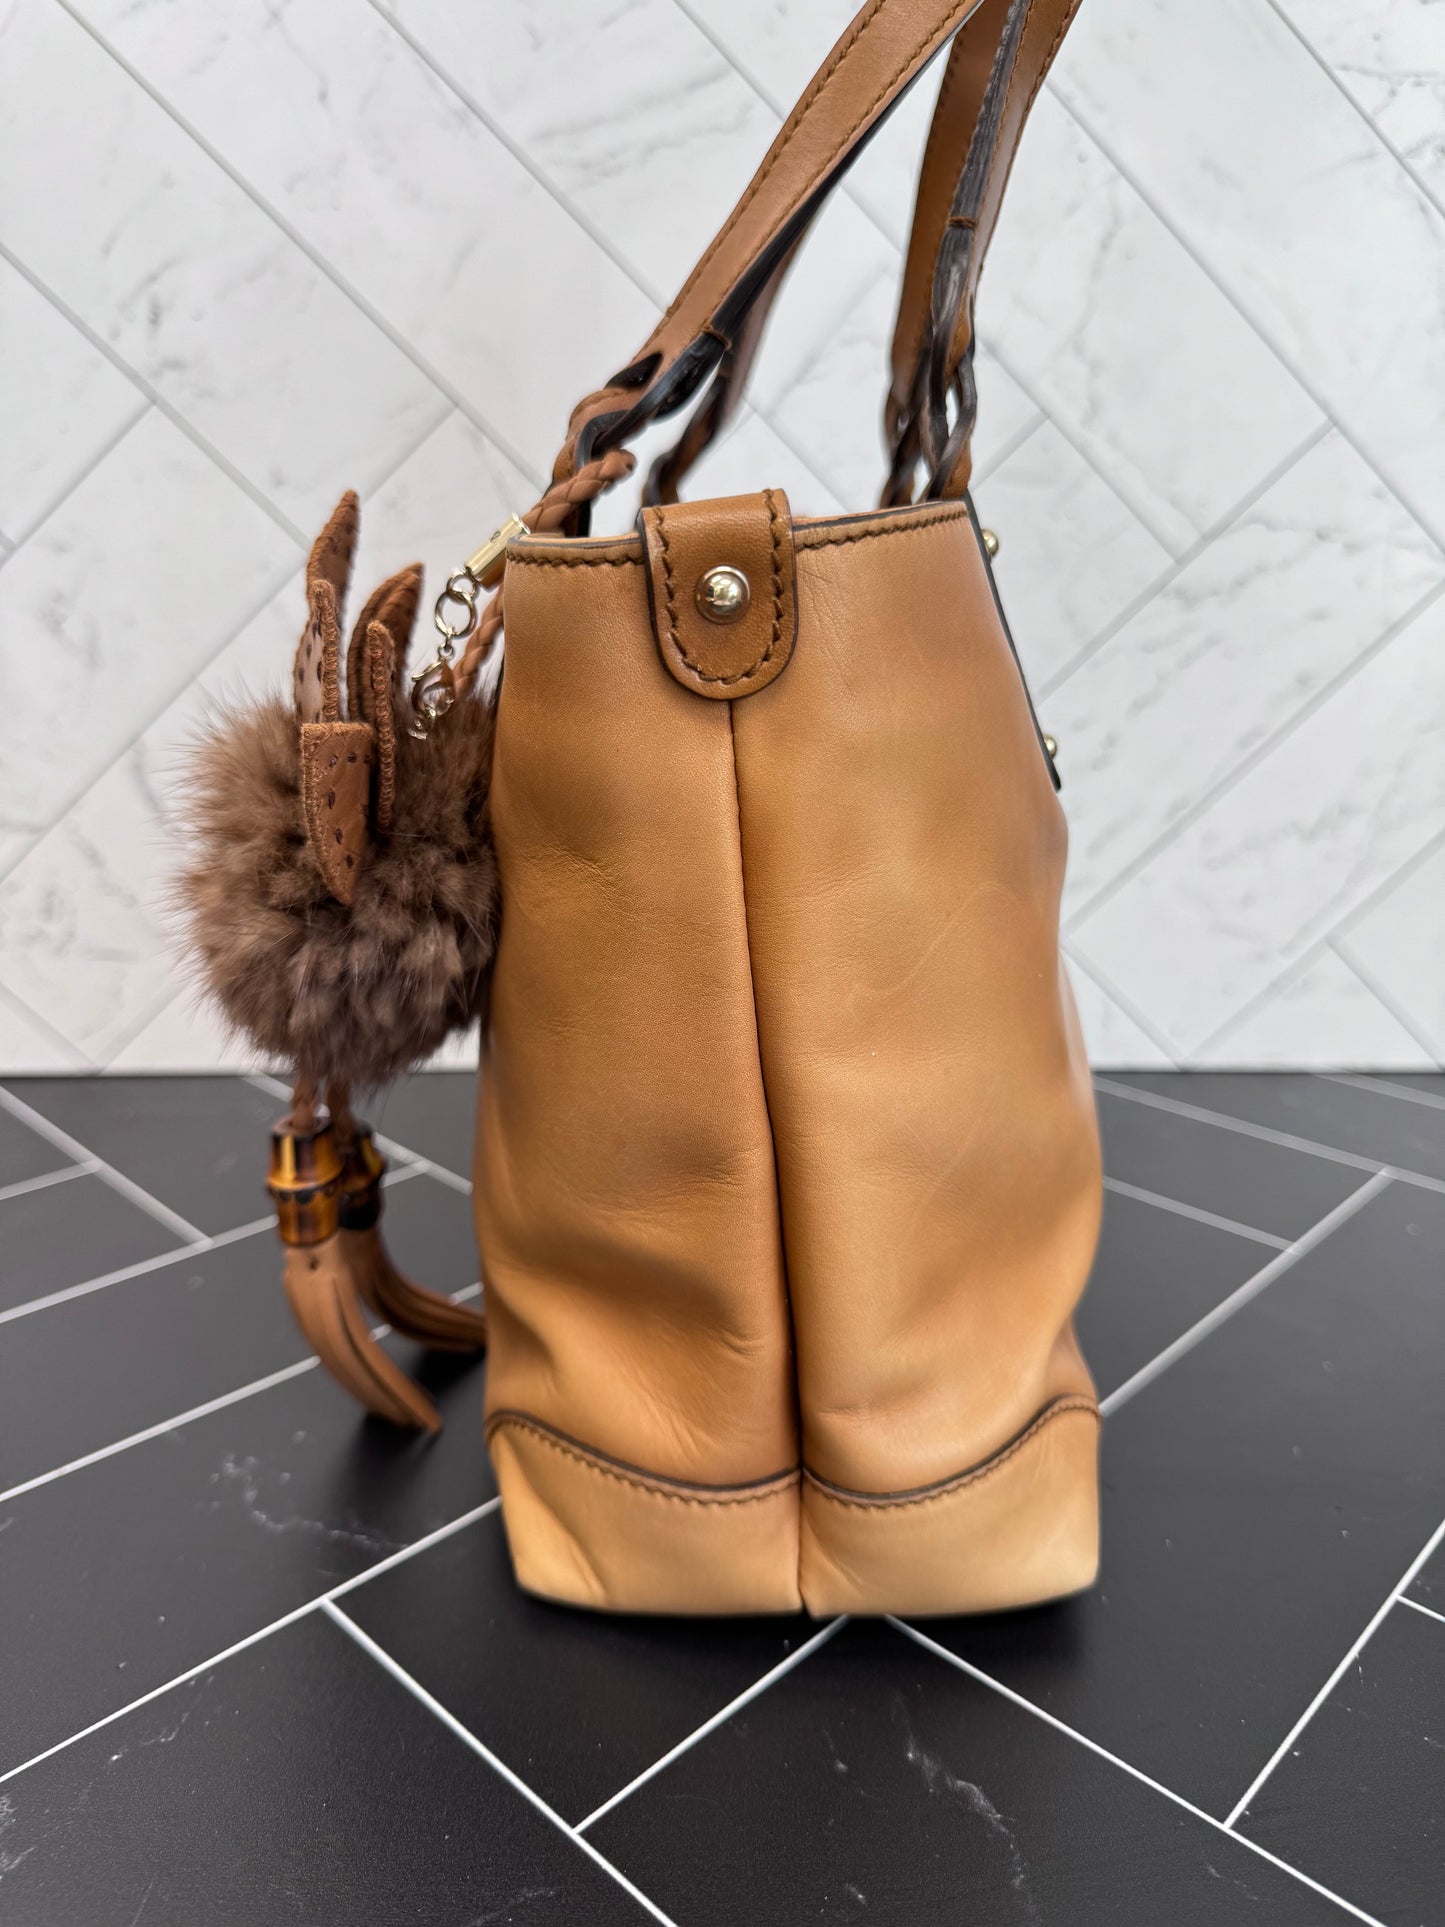 Gucci Tan Leather Craft Bag with Fur Pouch